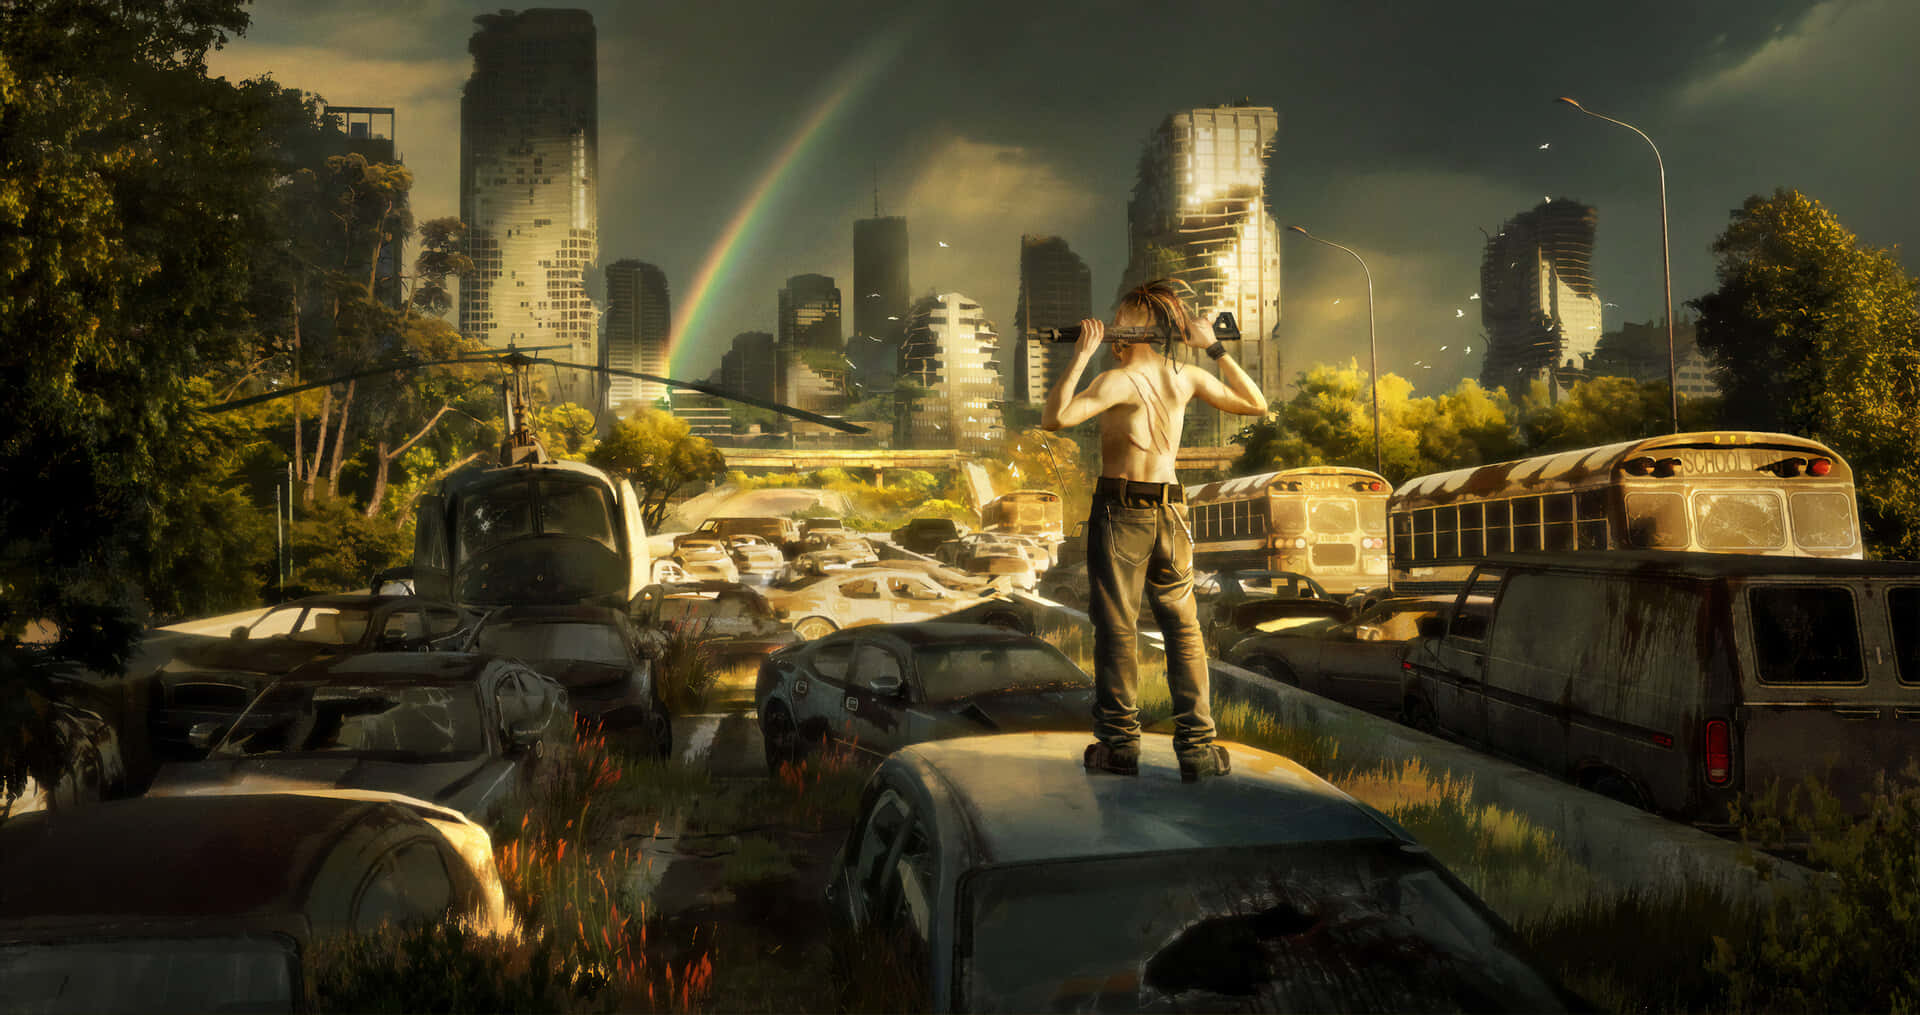 In the post-apocalyptic world, everything is unfamiliar and filled with danger Wallpaper